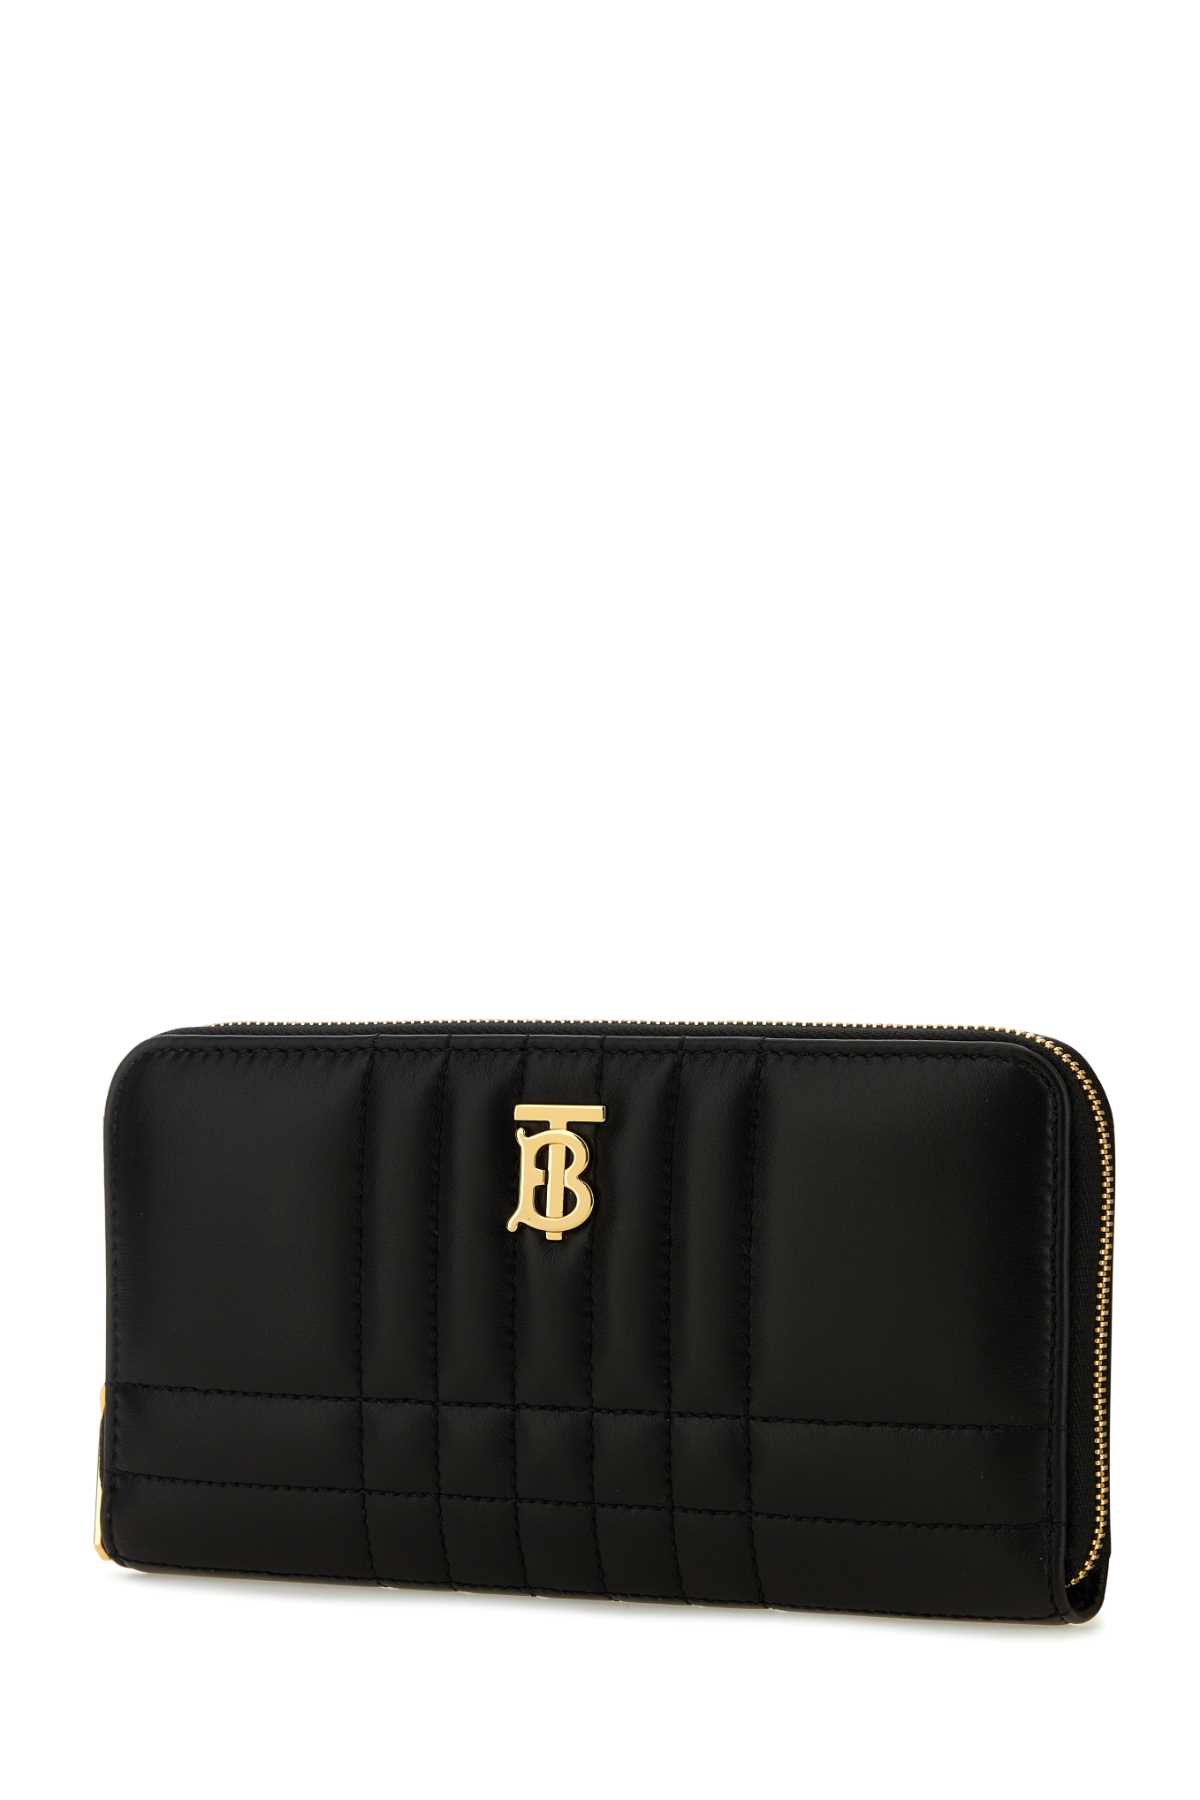 Shop Burberry Black Nappa Leather Lola Wallet In Blacklightgold